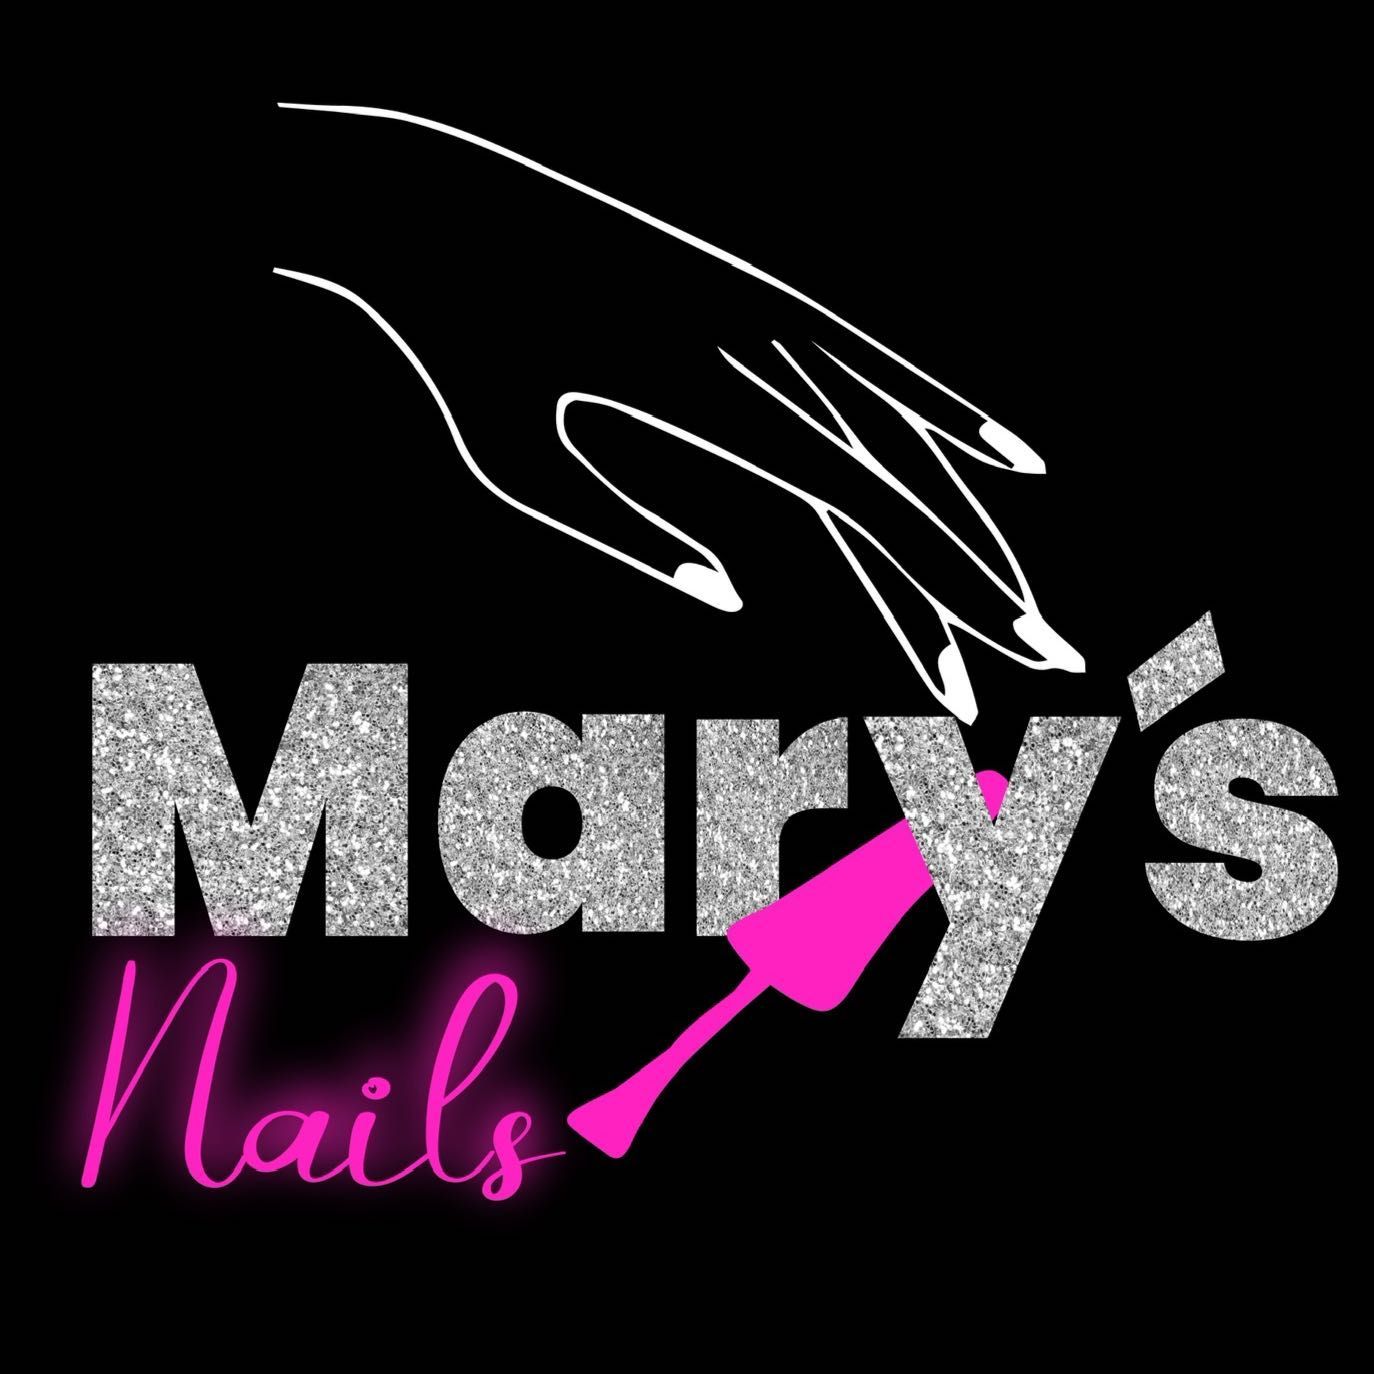 Mary’s Nails, 1420 w water av, Suit 104, Tampa, 33614